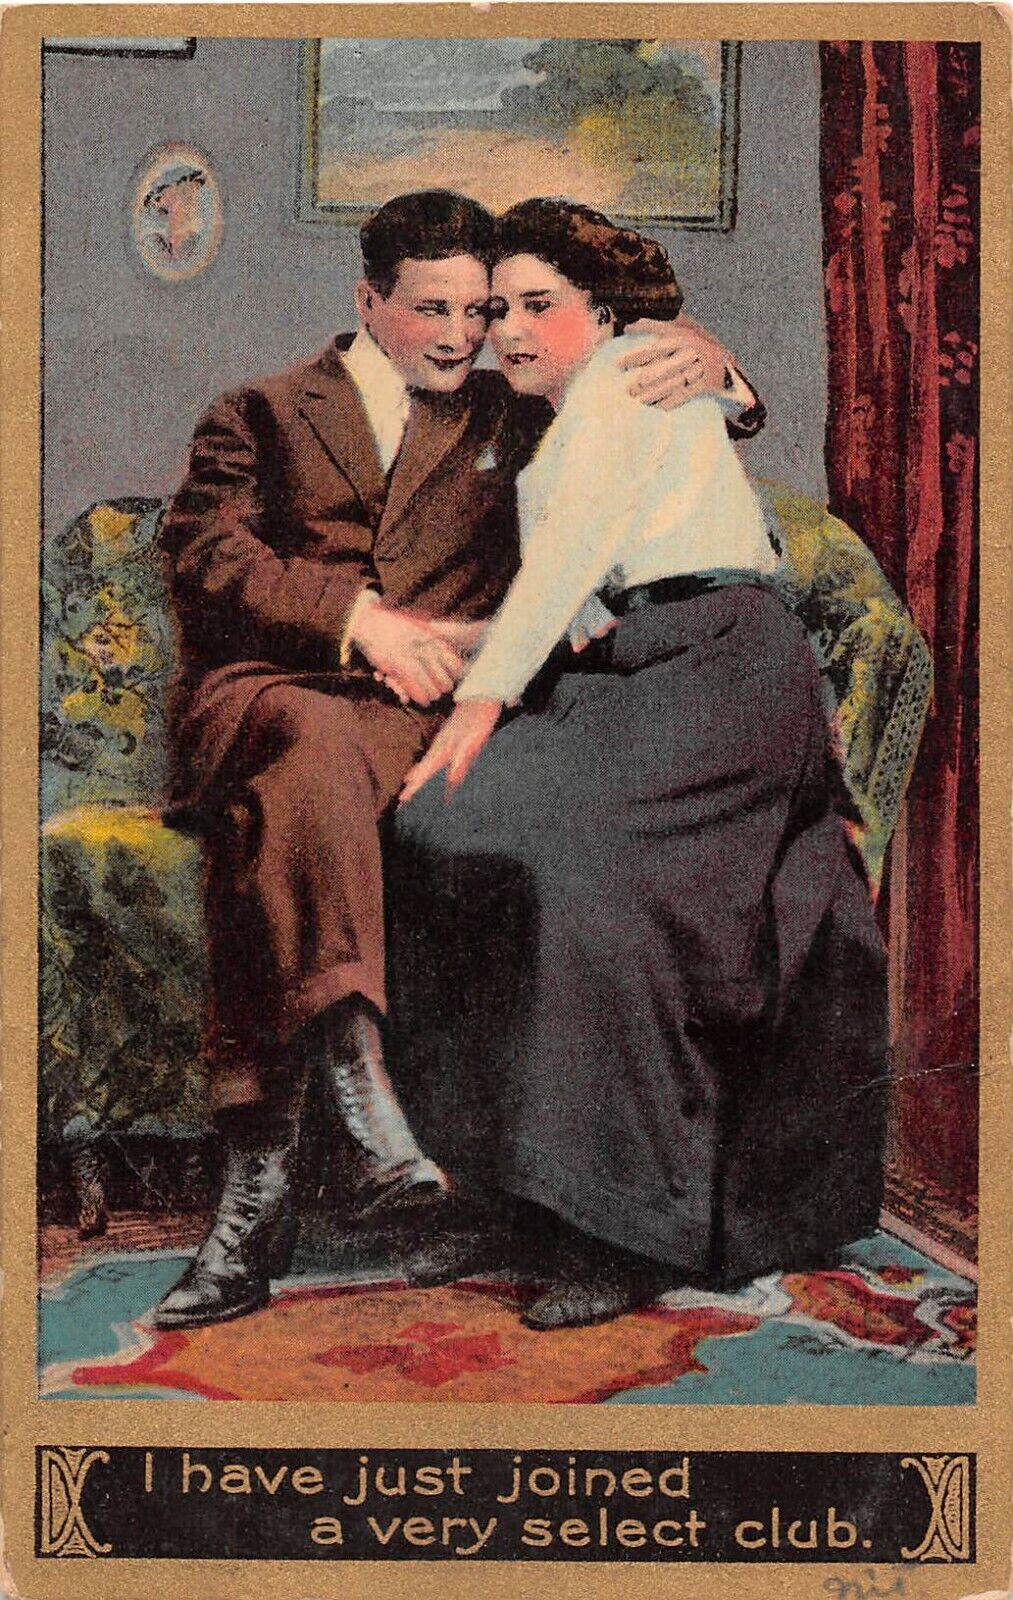 1910 Romantic PC of Lovers Cuddling on Couch-Have Just Joined A Very Select Club